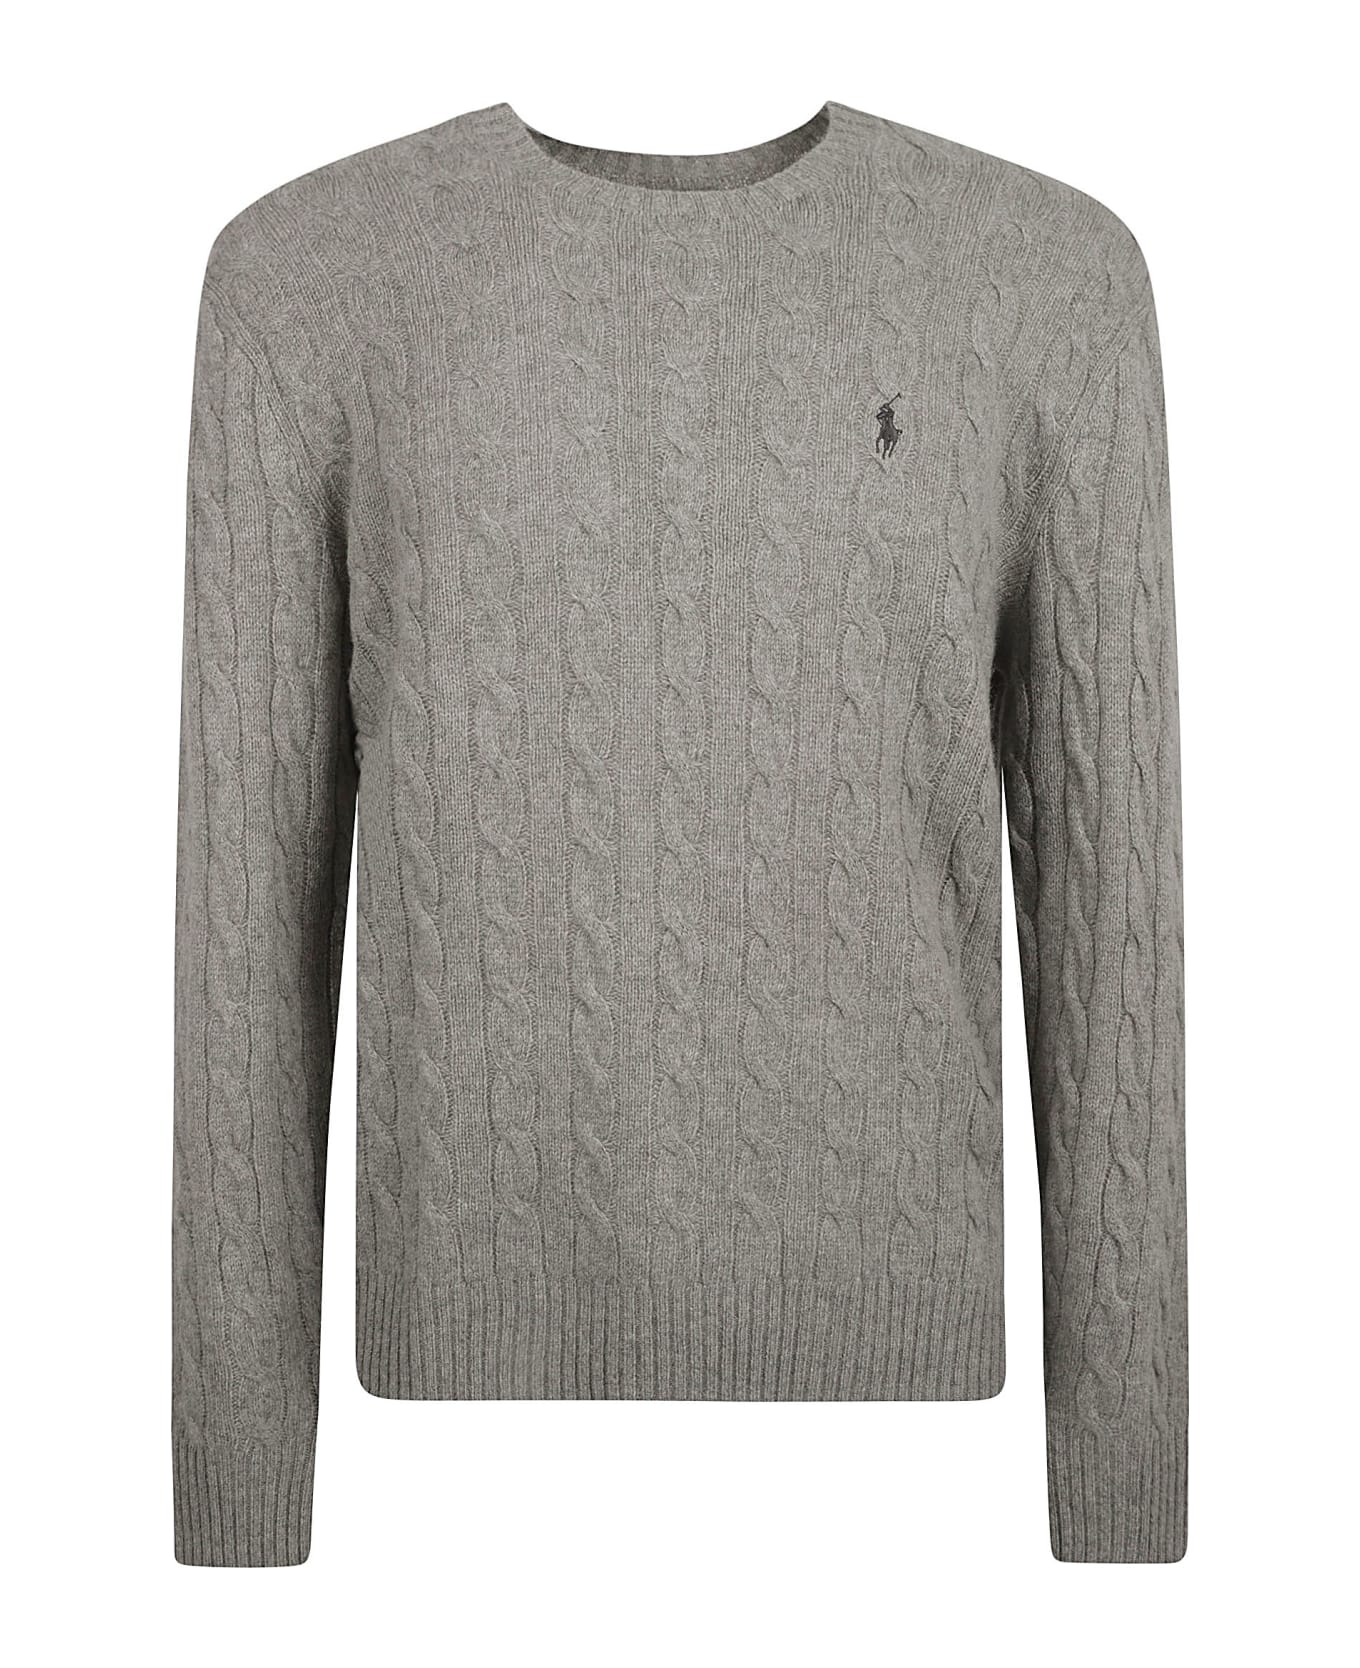 Ralph Lauren Logo Embroidery Patterned Woven Sweater - Grey